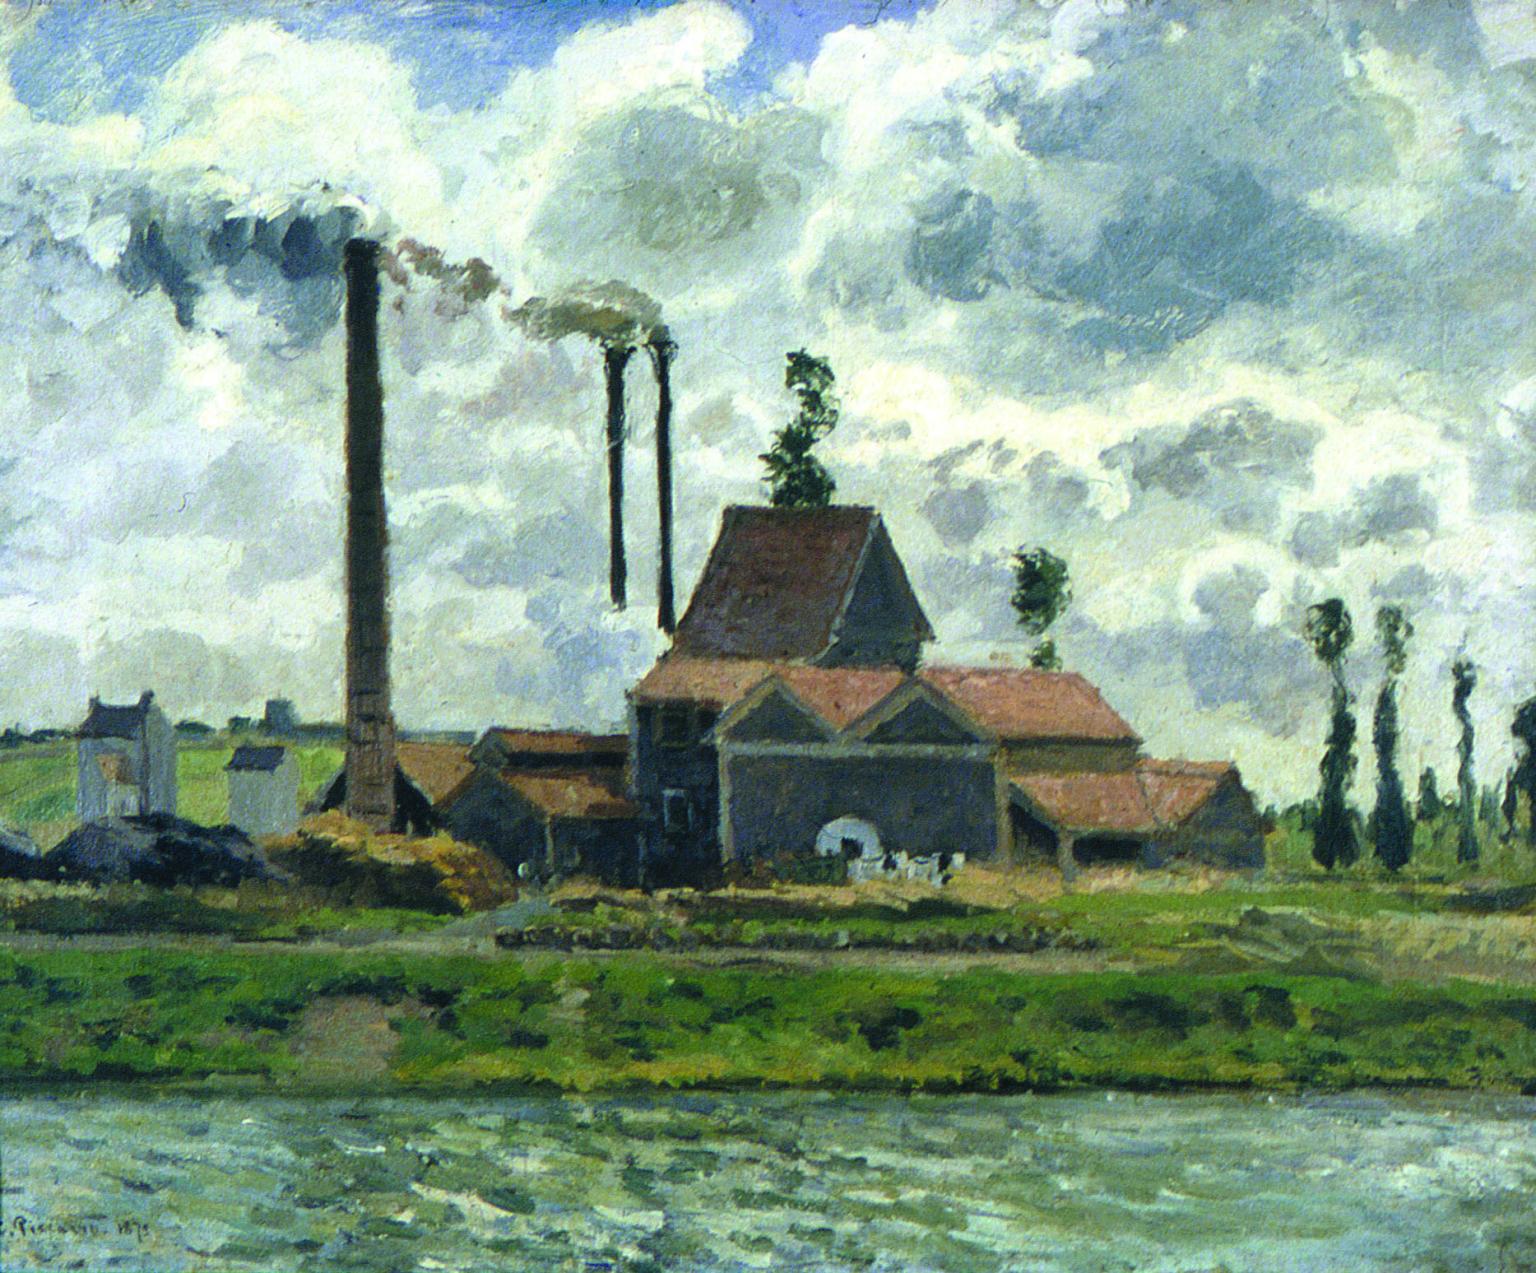 Painting of factory in background and water in foreground. 